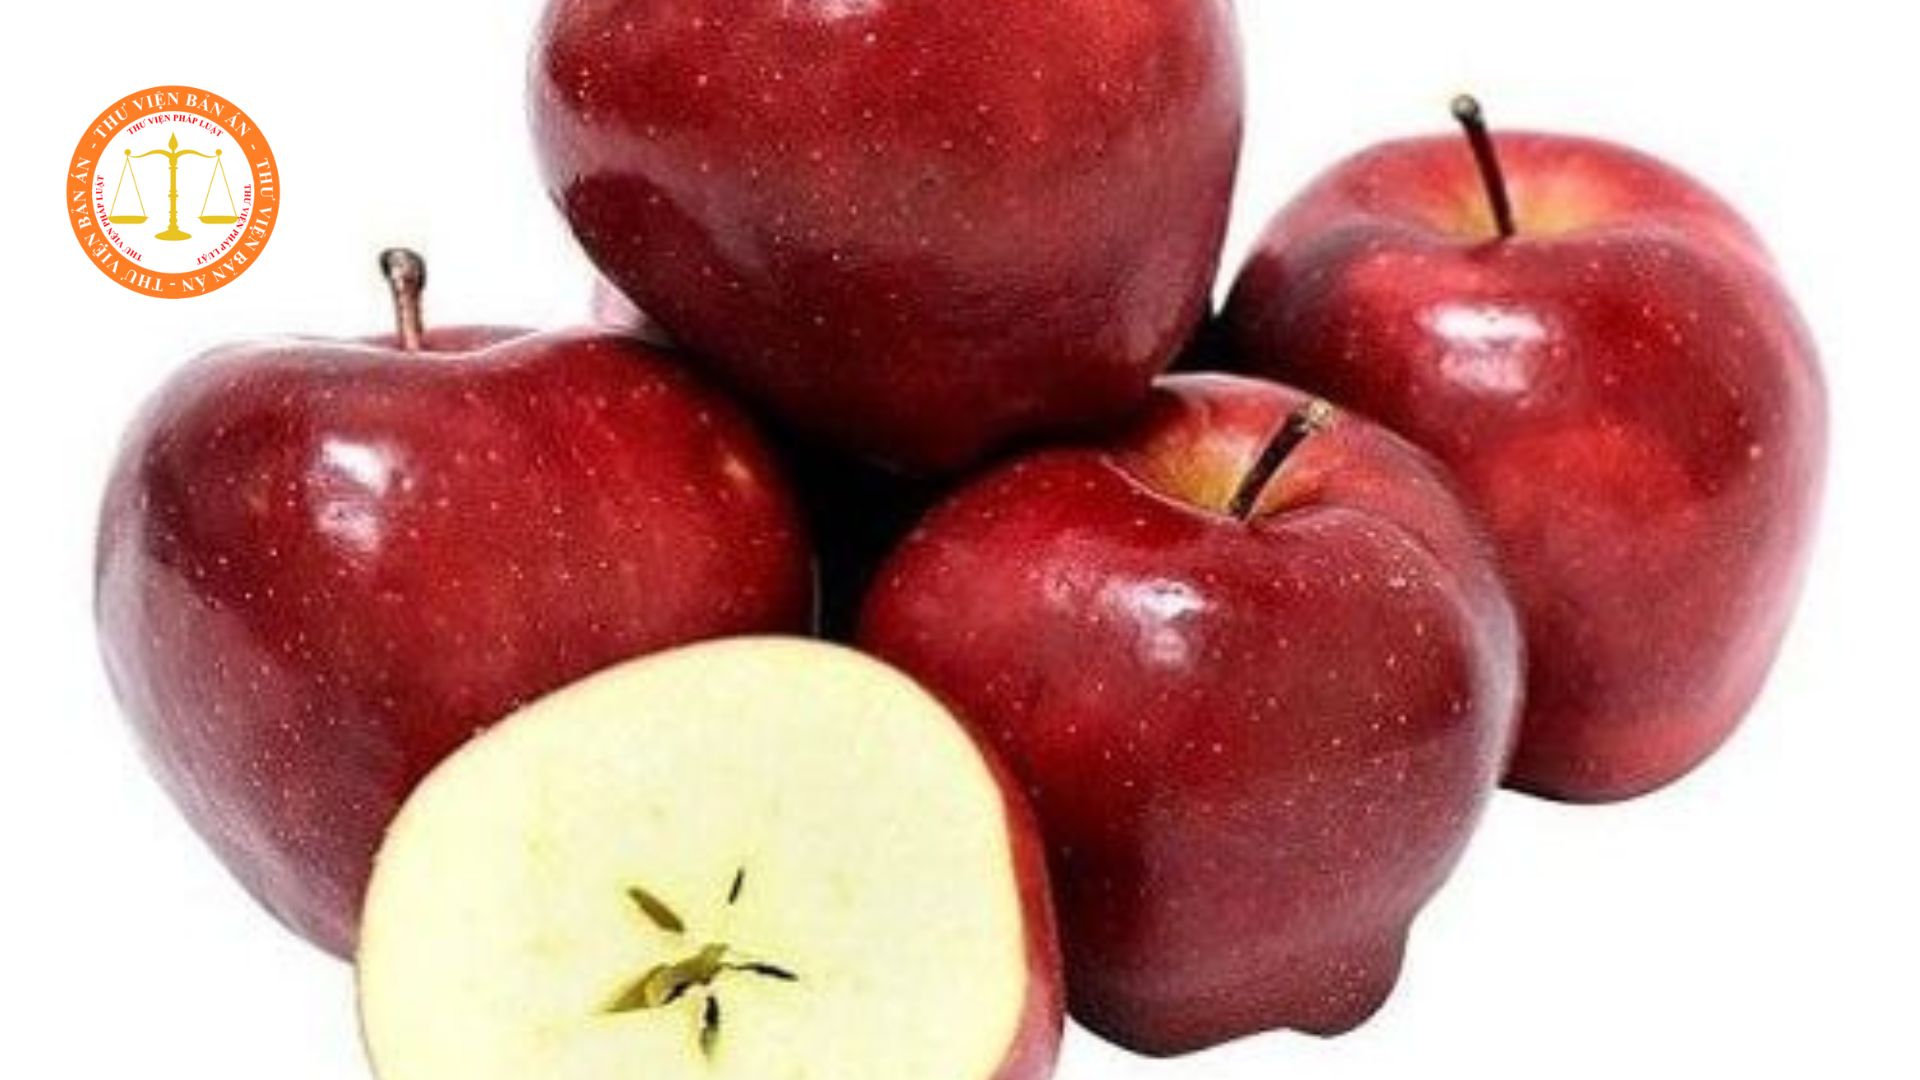 What are the quality requirements for fresh apples in Vietnam?